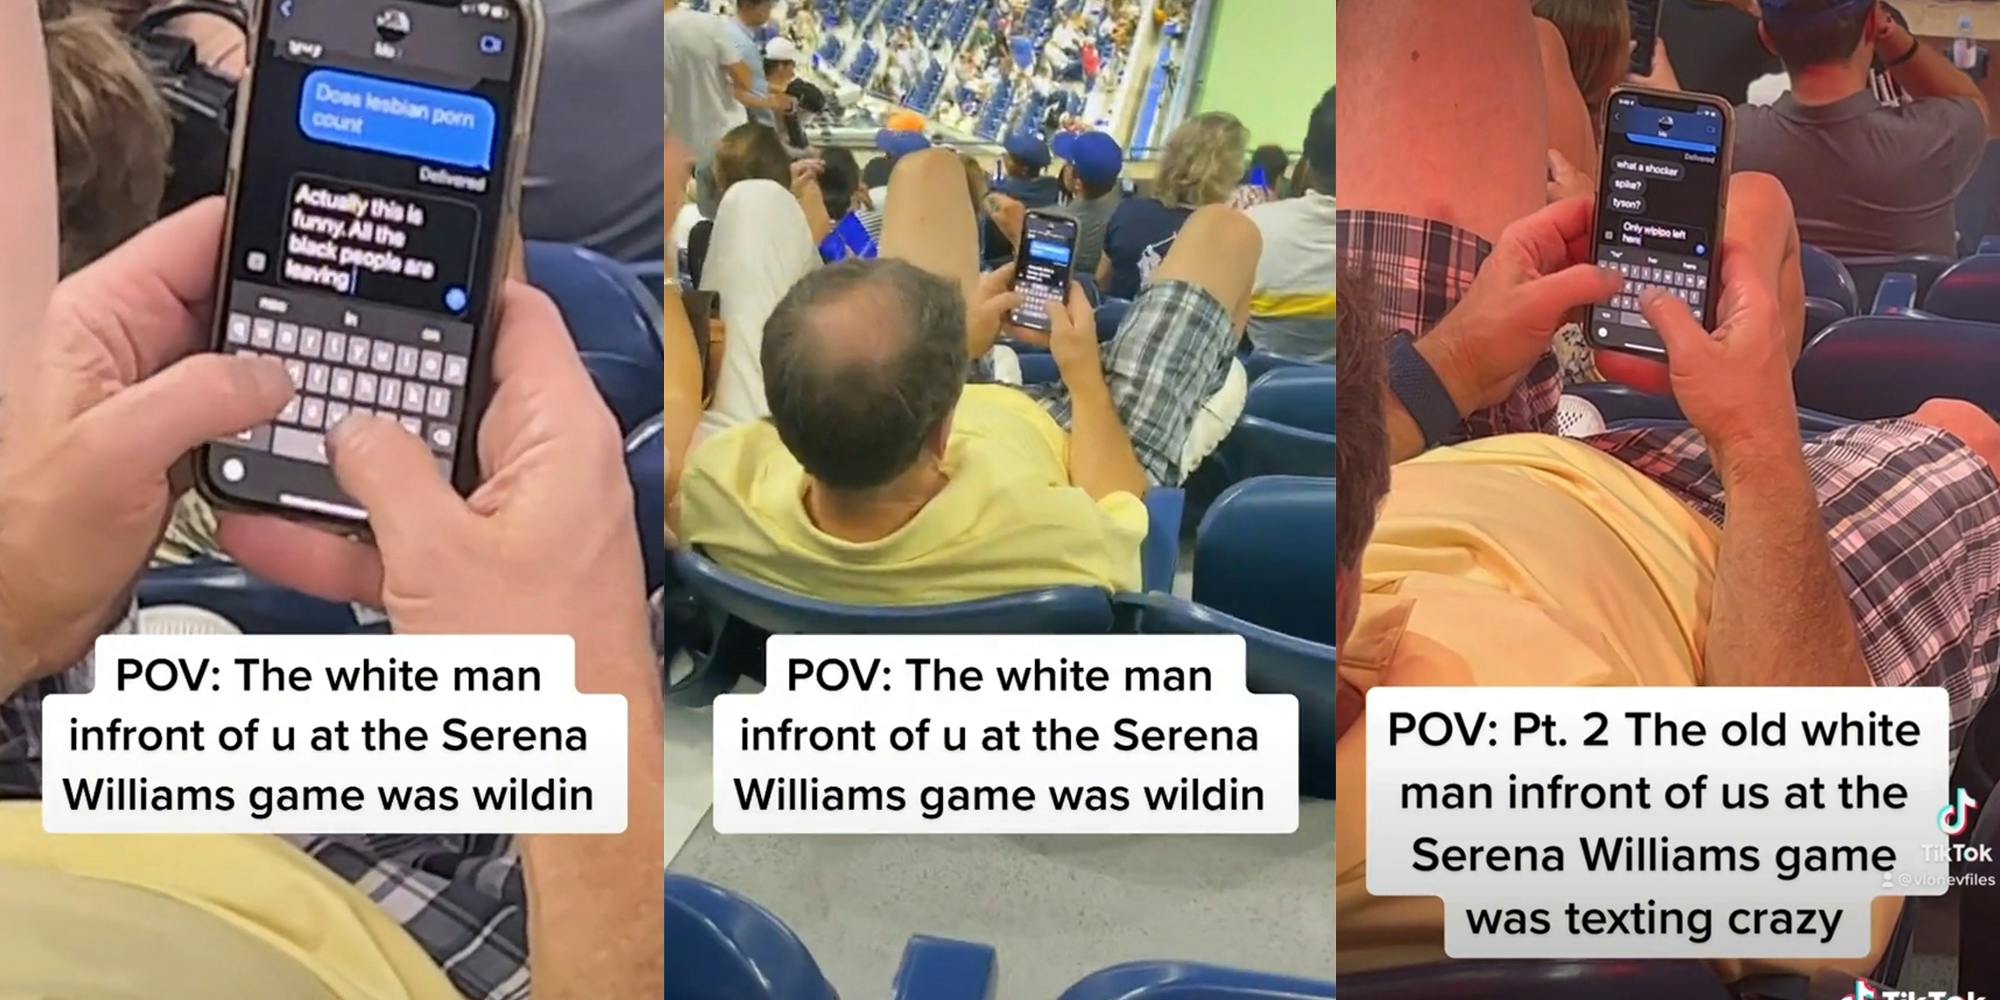 Black Porn On Phone - White Man Texts Black People Are 'Leaving' Serena Williams Match